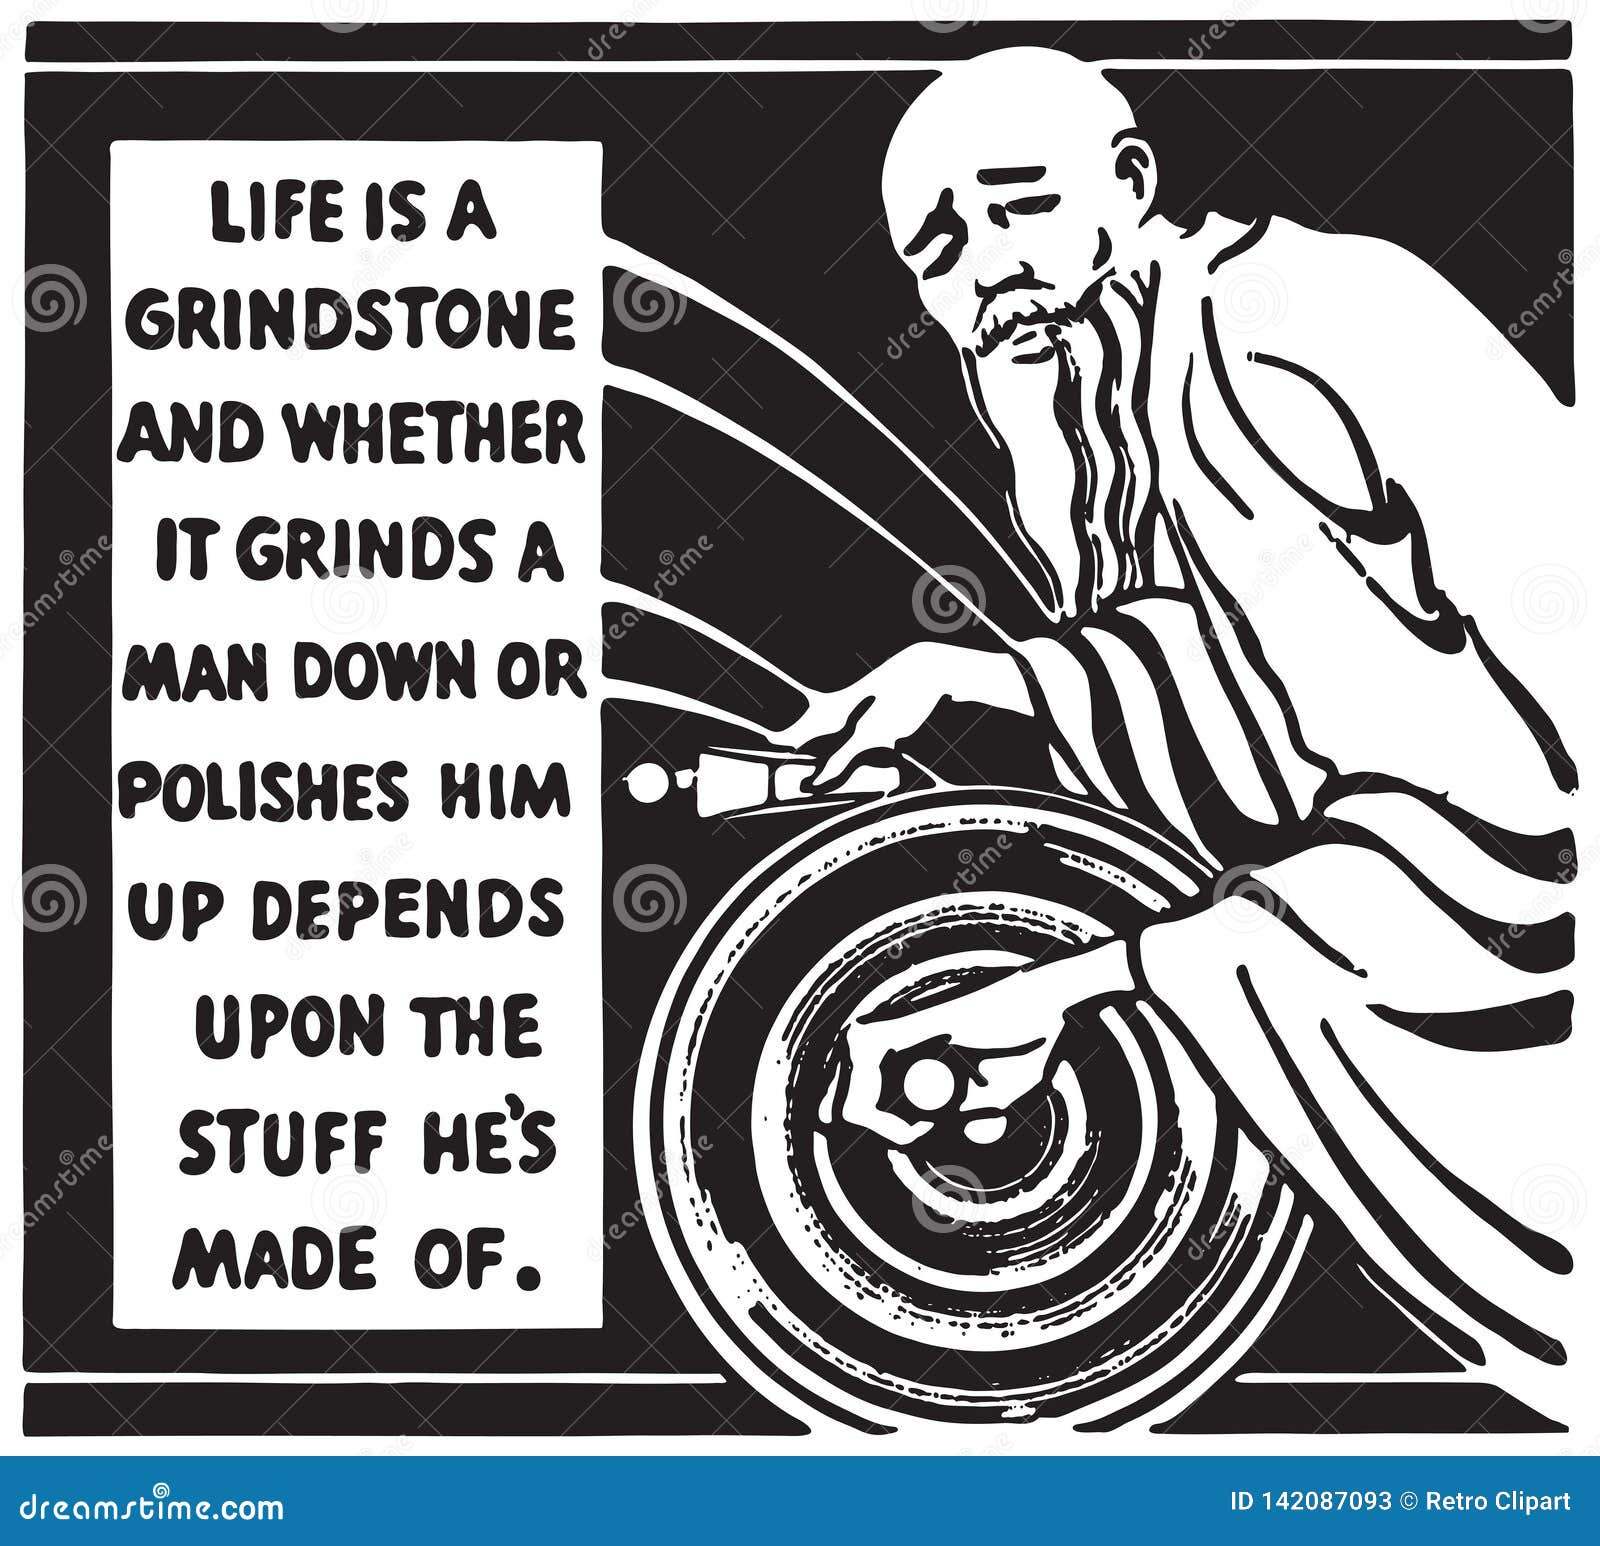 life is a grindstone